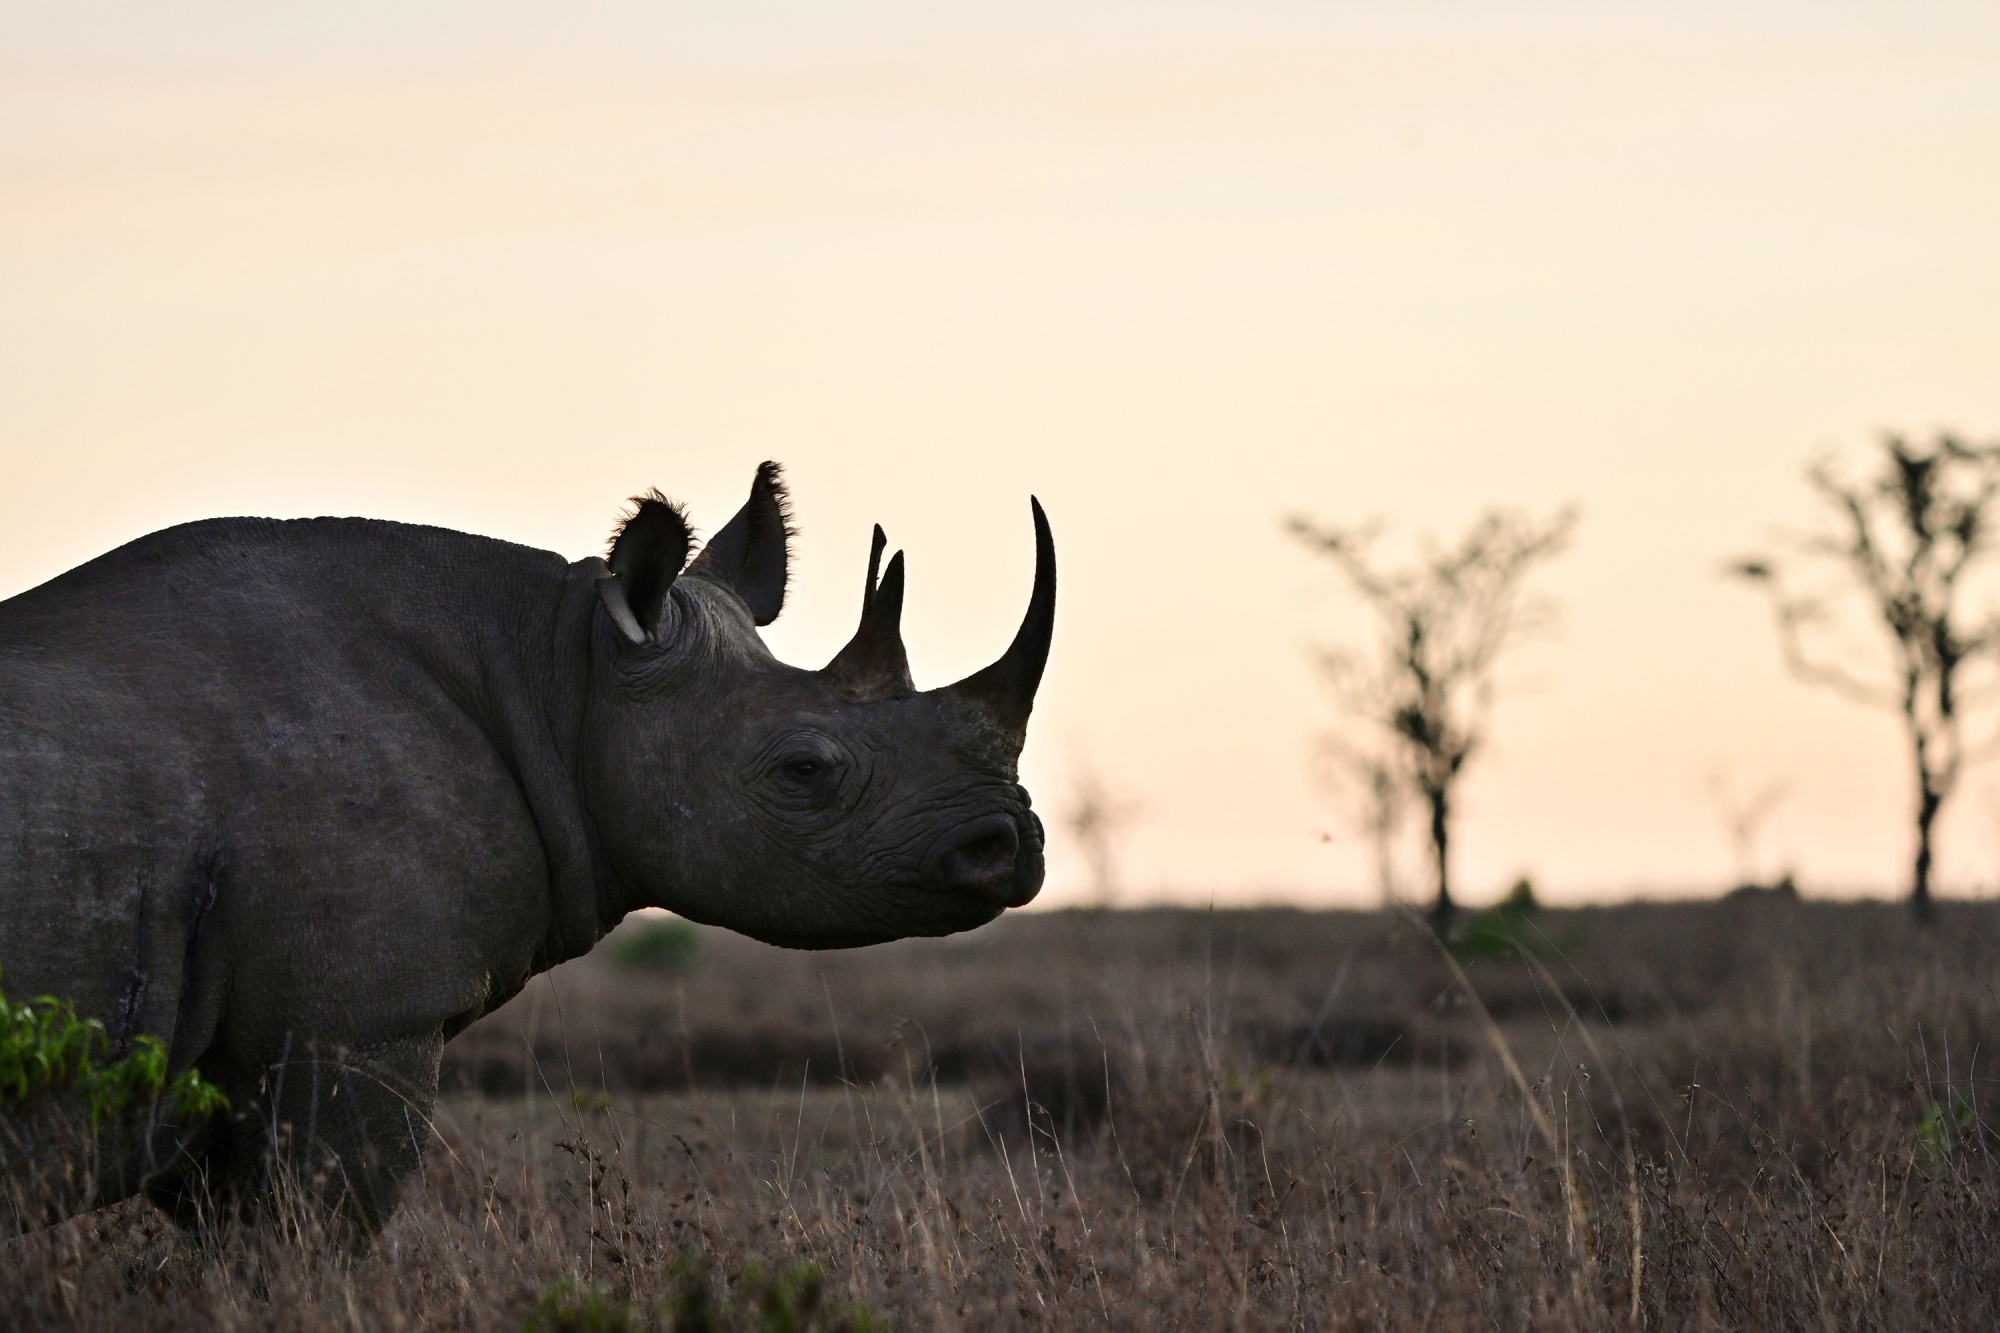 Black rhino numbers have dropped to about 5,500